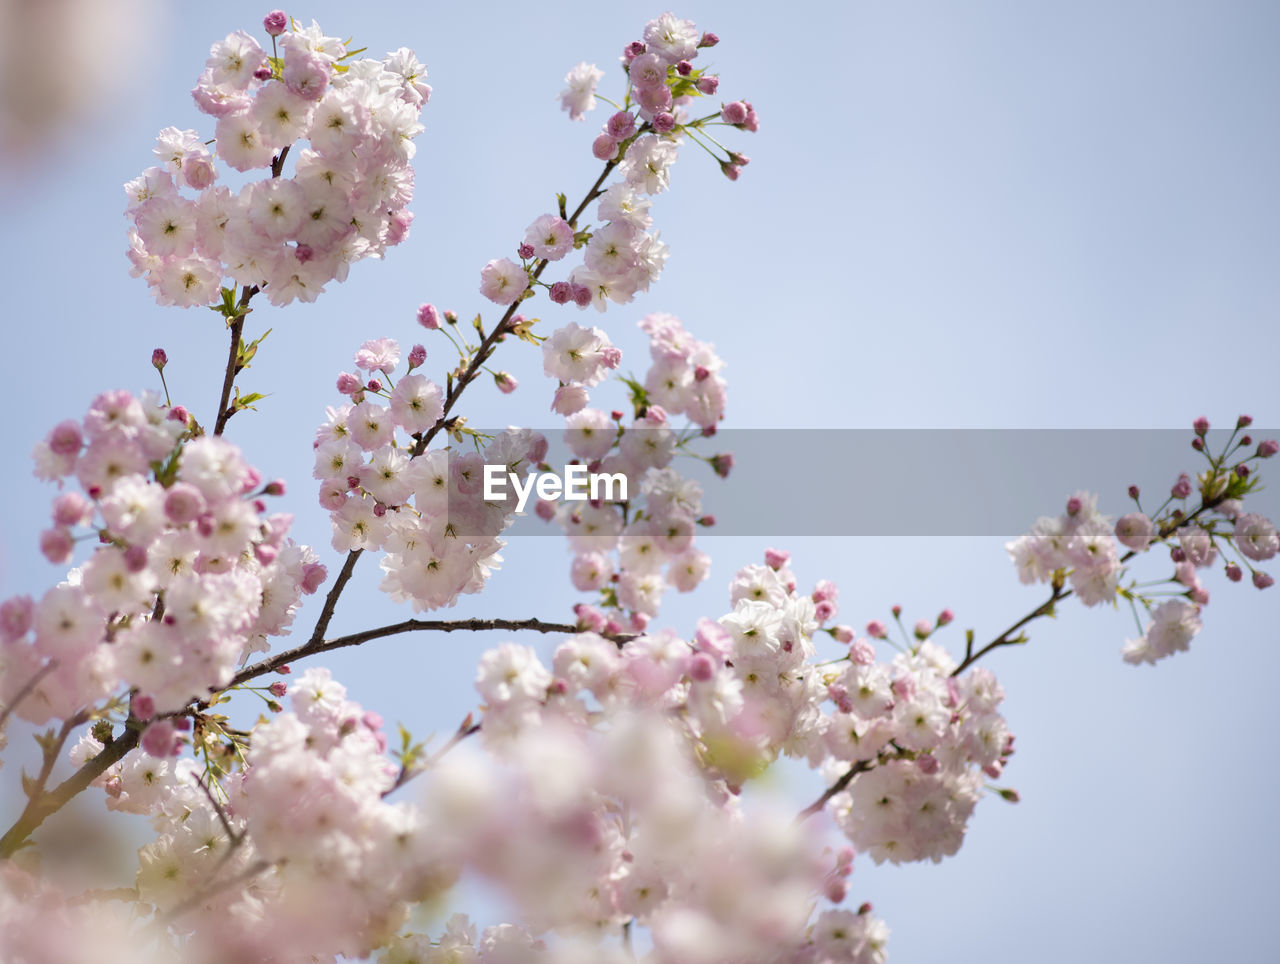 LOW ANGLE VIEW OF CHERRY BLOSSOM TREE